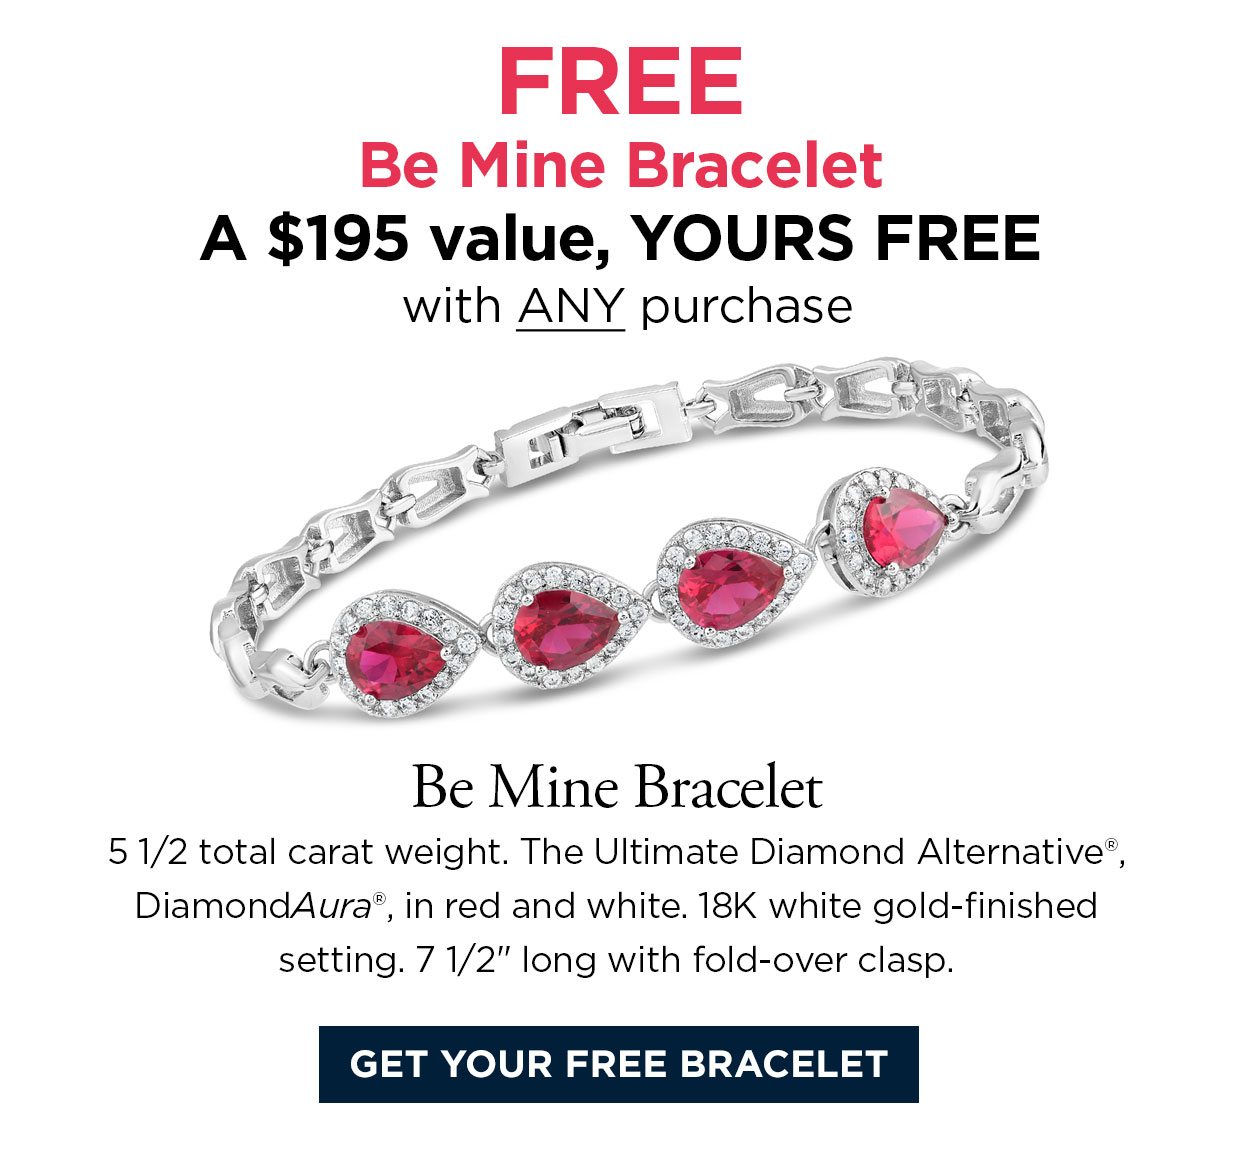 FREE Be Mine Bracelet A $195 value, YOURS FREE with ANY purchase. Be Mine Bracelet 5 1/2 total carat weight. The Ultimate Diamond Alternative®, DiamondAura®, in red and white. 18K white gold-finished setting. 7 1/2 inches long with fold-over clasp. Get your free bracelet link.